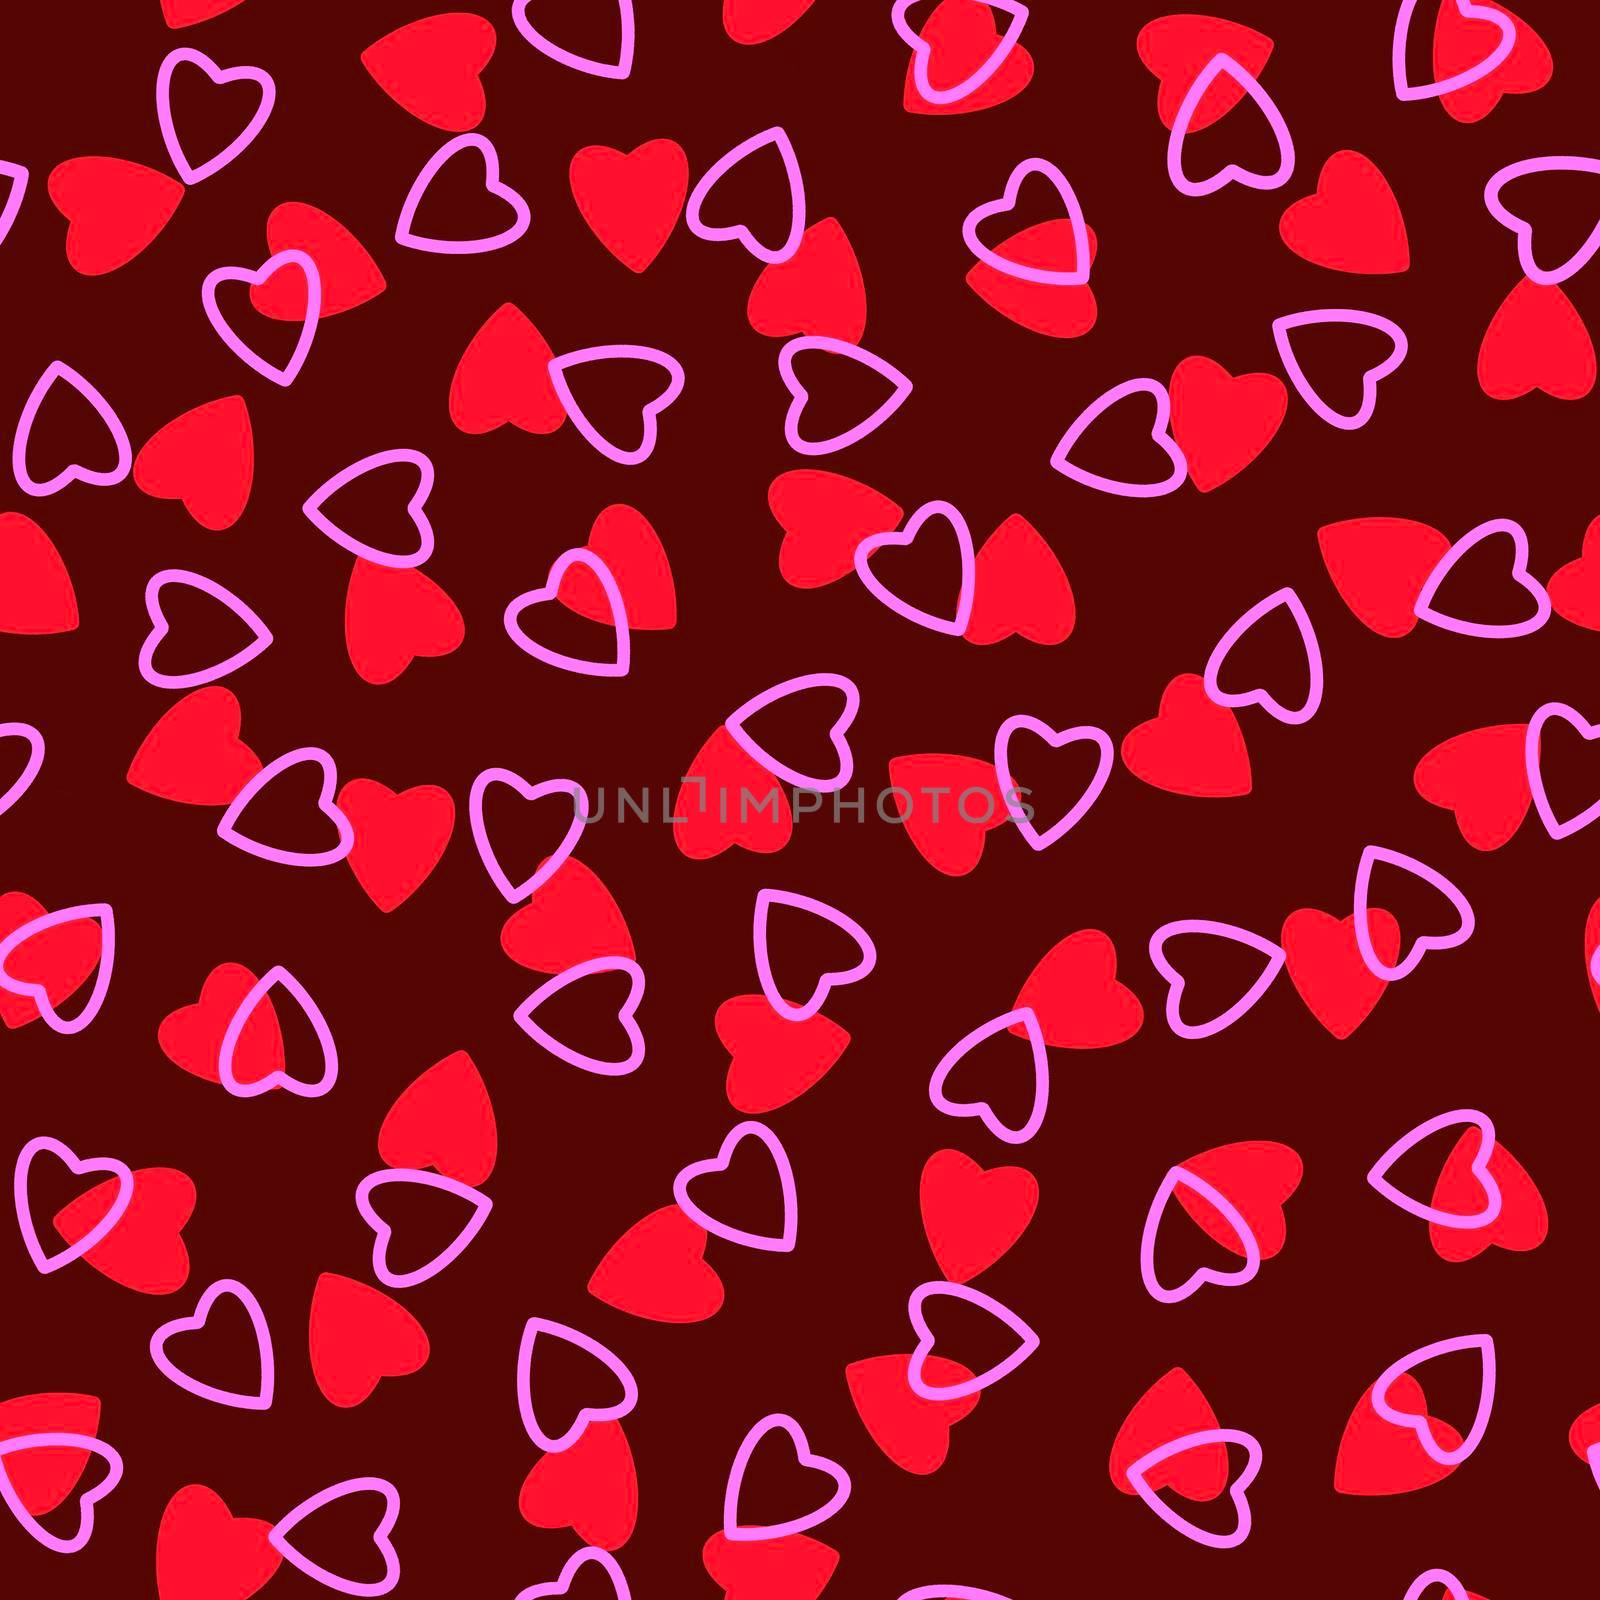 Simple heart seamless pattern,endless chaotic texture made of tiny heart silhouettes.Valentines,mothers day background.Great for Easter,wedding,scrapbook,gift wrapping paper,textiles.Red,pink,burgundy by Angelsmoon